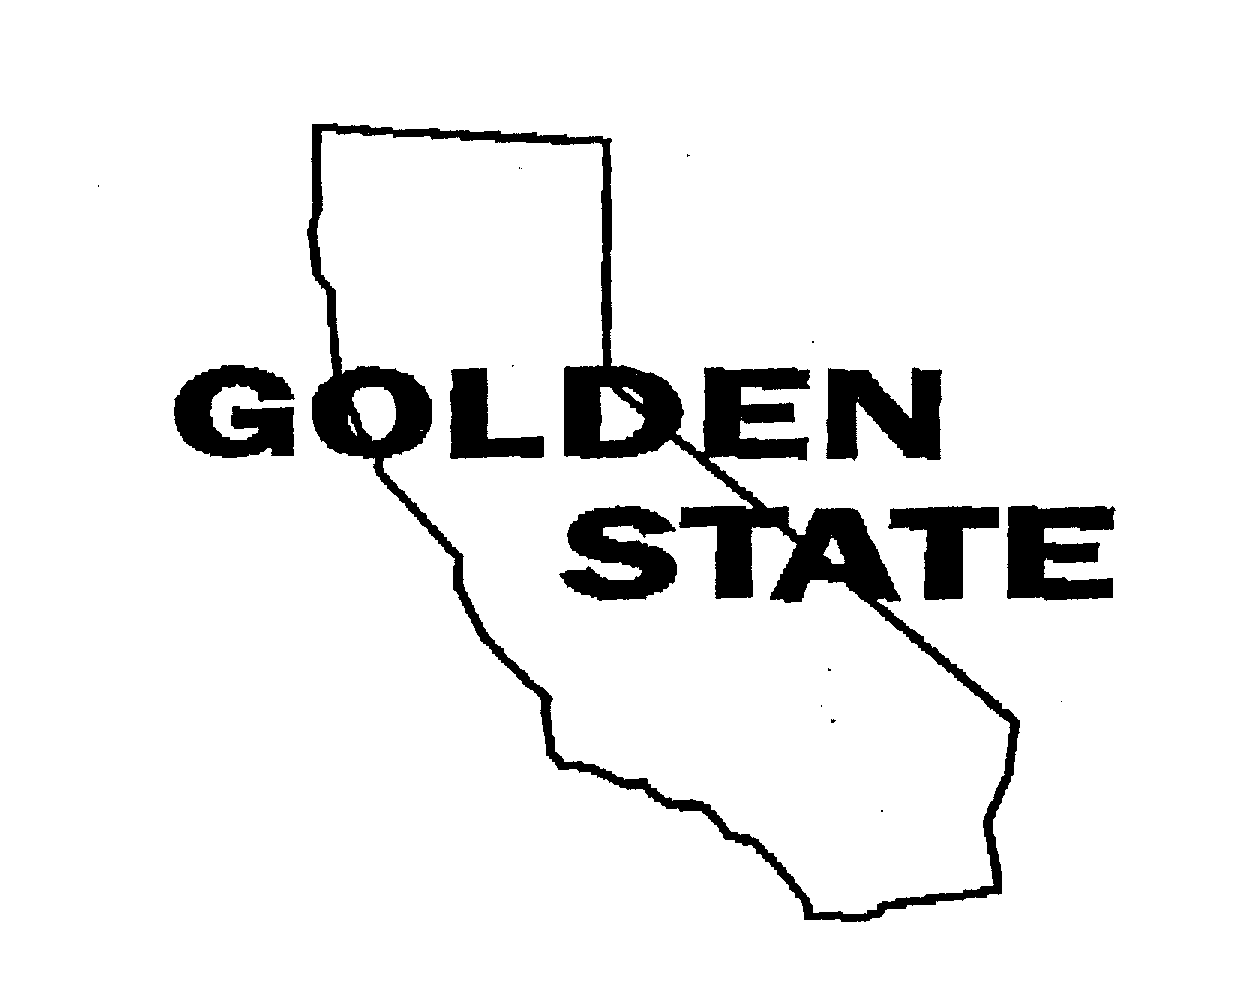 GOLDEN STATE